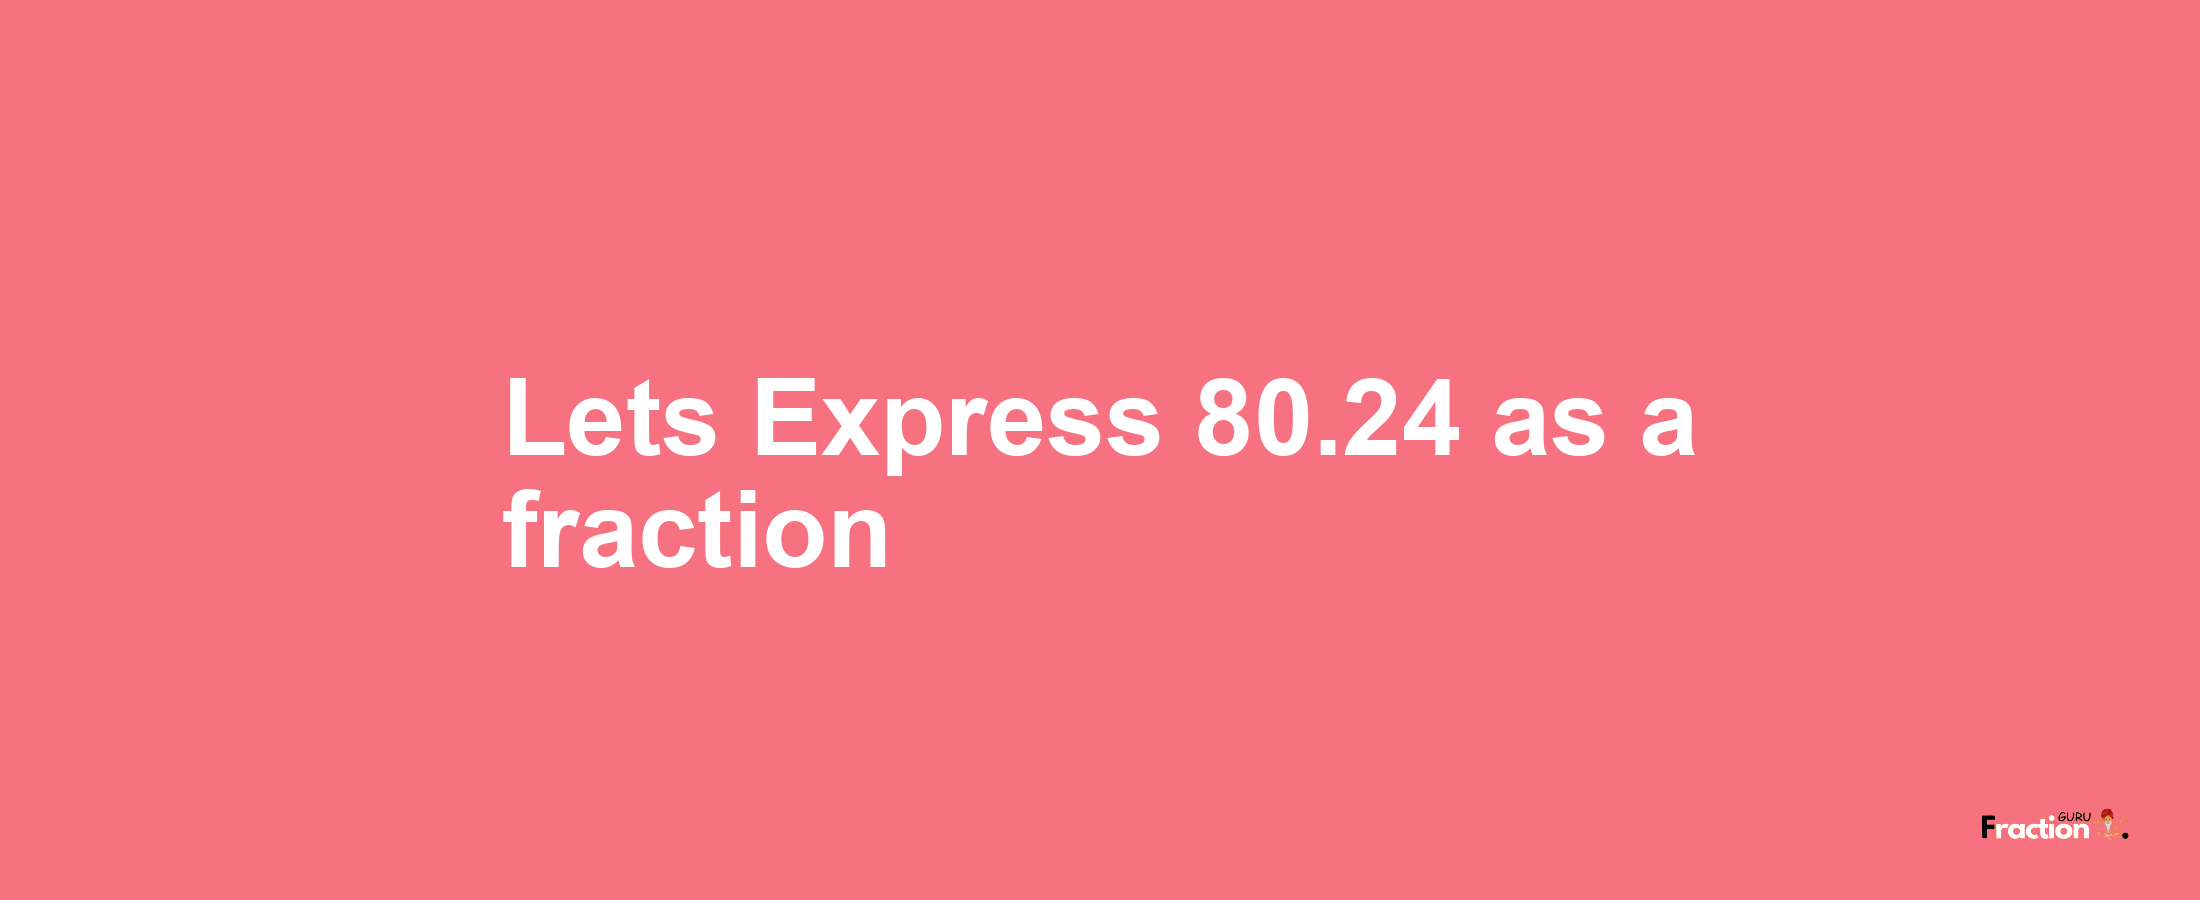 Lets Express 80.24 as afraction